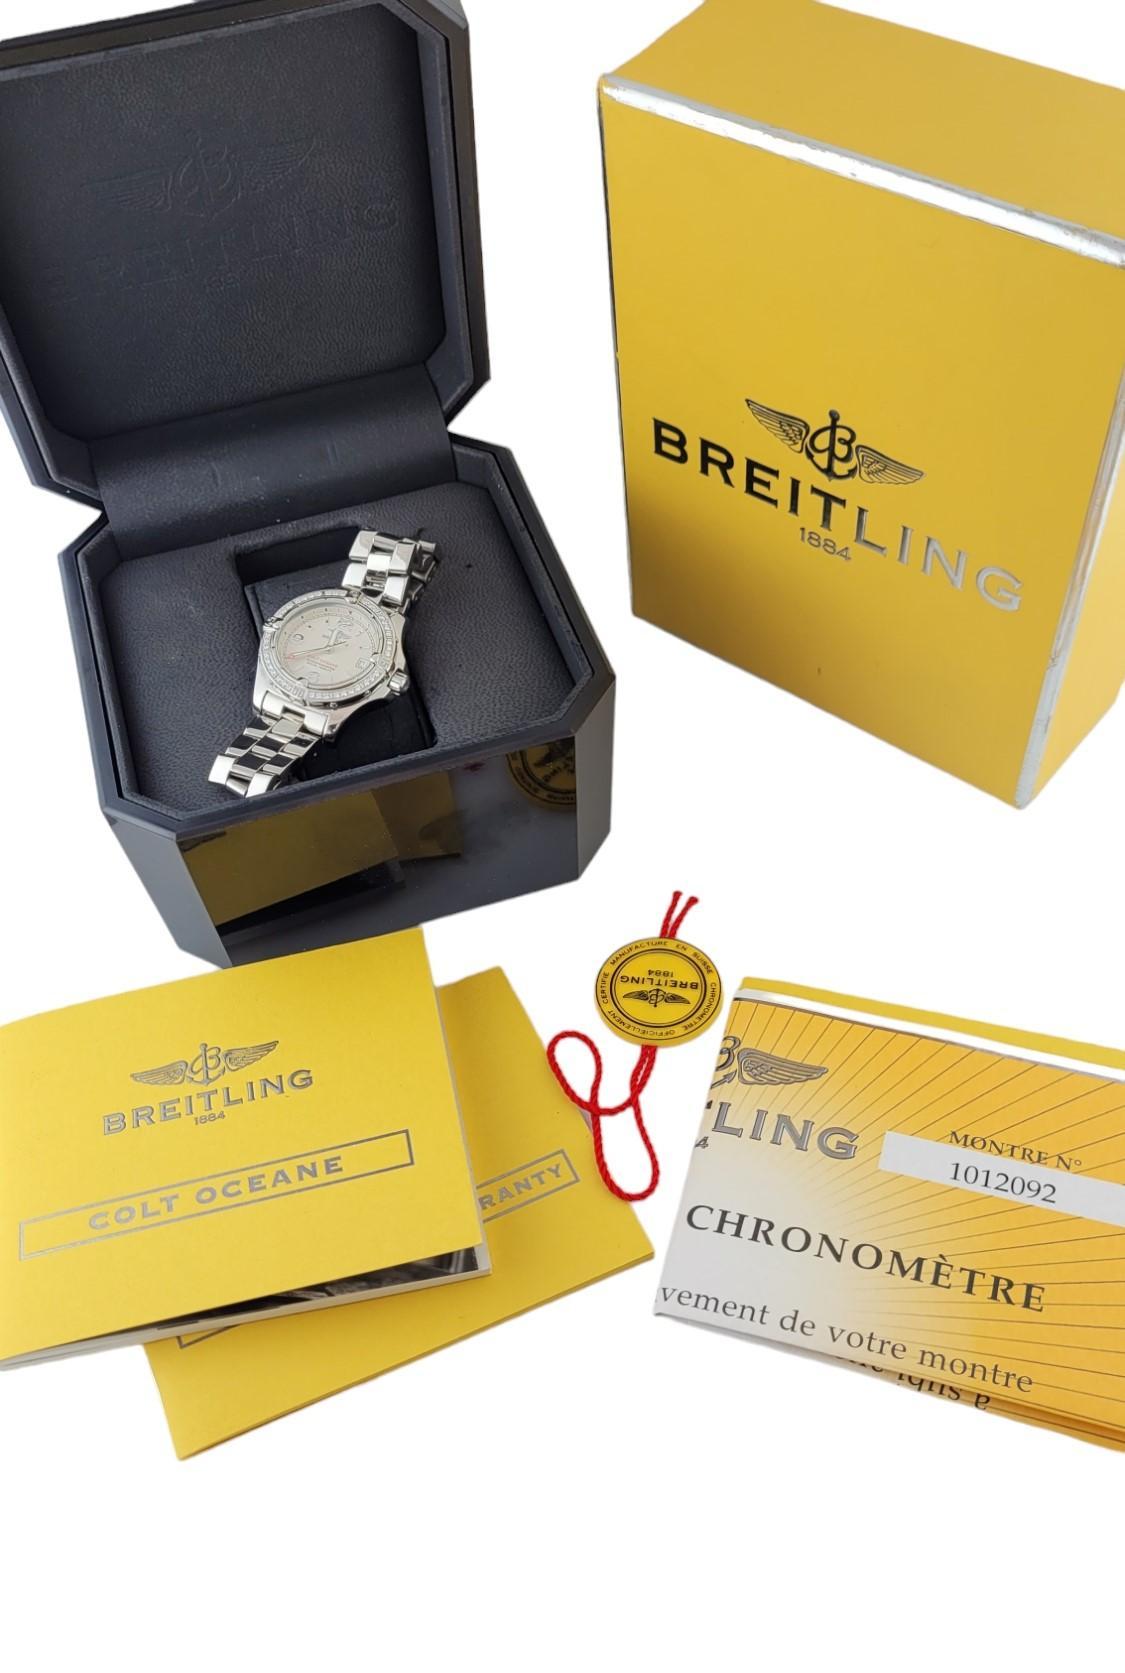 2007 Breitling Ladies Colt Oceane Diamond Watch A77380 Box/Papers # 17227 For Sale 5